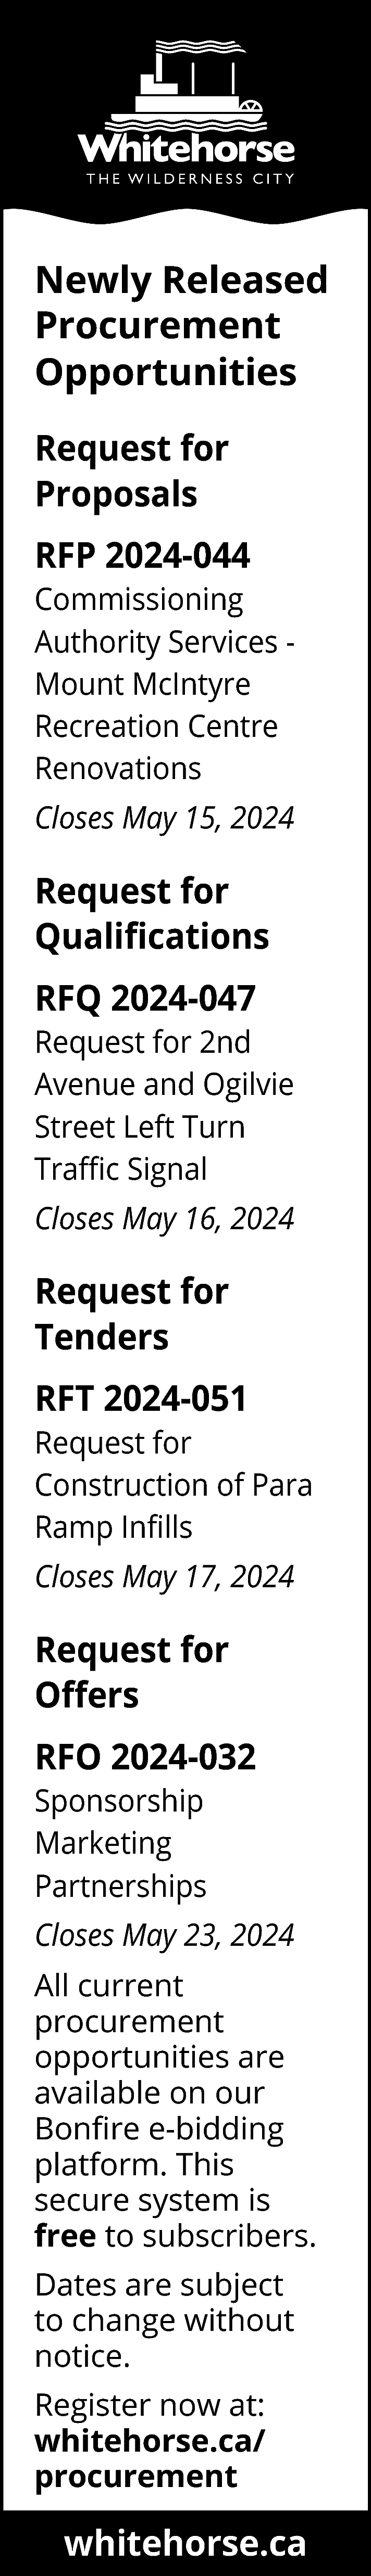 Newly Released <br>Procurement <br>Opportunities <br>Request  Newly Released  Procurement  Opportunities  Request for  Proposals  RFP 2024-044  Commissioning  Authority Services Mount McIntyre  Recreation Centre  Renovations  Closes May 15, 2024    Request for  Qualifications  RFQ 2024-047  Request for 2nd  Avenue and Ogilvie  Street Left Turn  Traffic Signal  Closes May 16, 2024    Request for  Tenders  RFT 2024-051  Request for  Construction of Para  Ramp Infills  Closes May 17, 2024    Request for  Offers  RFO 2024-032  Sponsorship  Marketing  Partnerships  Closes May 23, 2024  All current  procurement  opportunities are  available on our  Bonfire e-bidding  platform. This  secure system is  free to subscribers.  Dates are subject  to change without  notice.  Register now at:  whitehorse.ca/  procurement    whitehorse.ca    